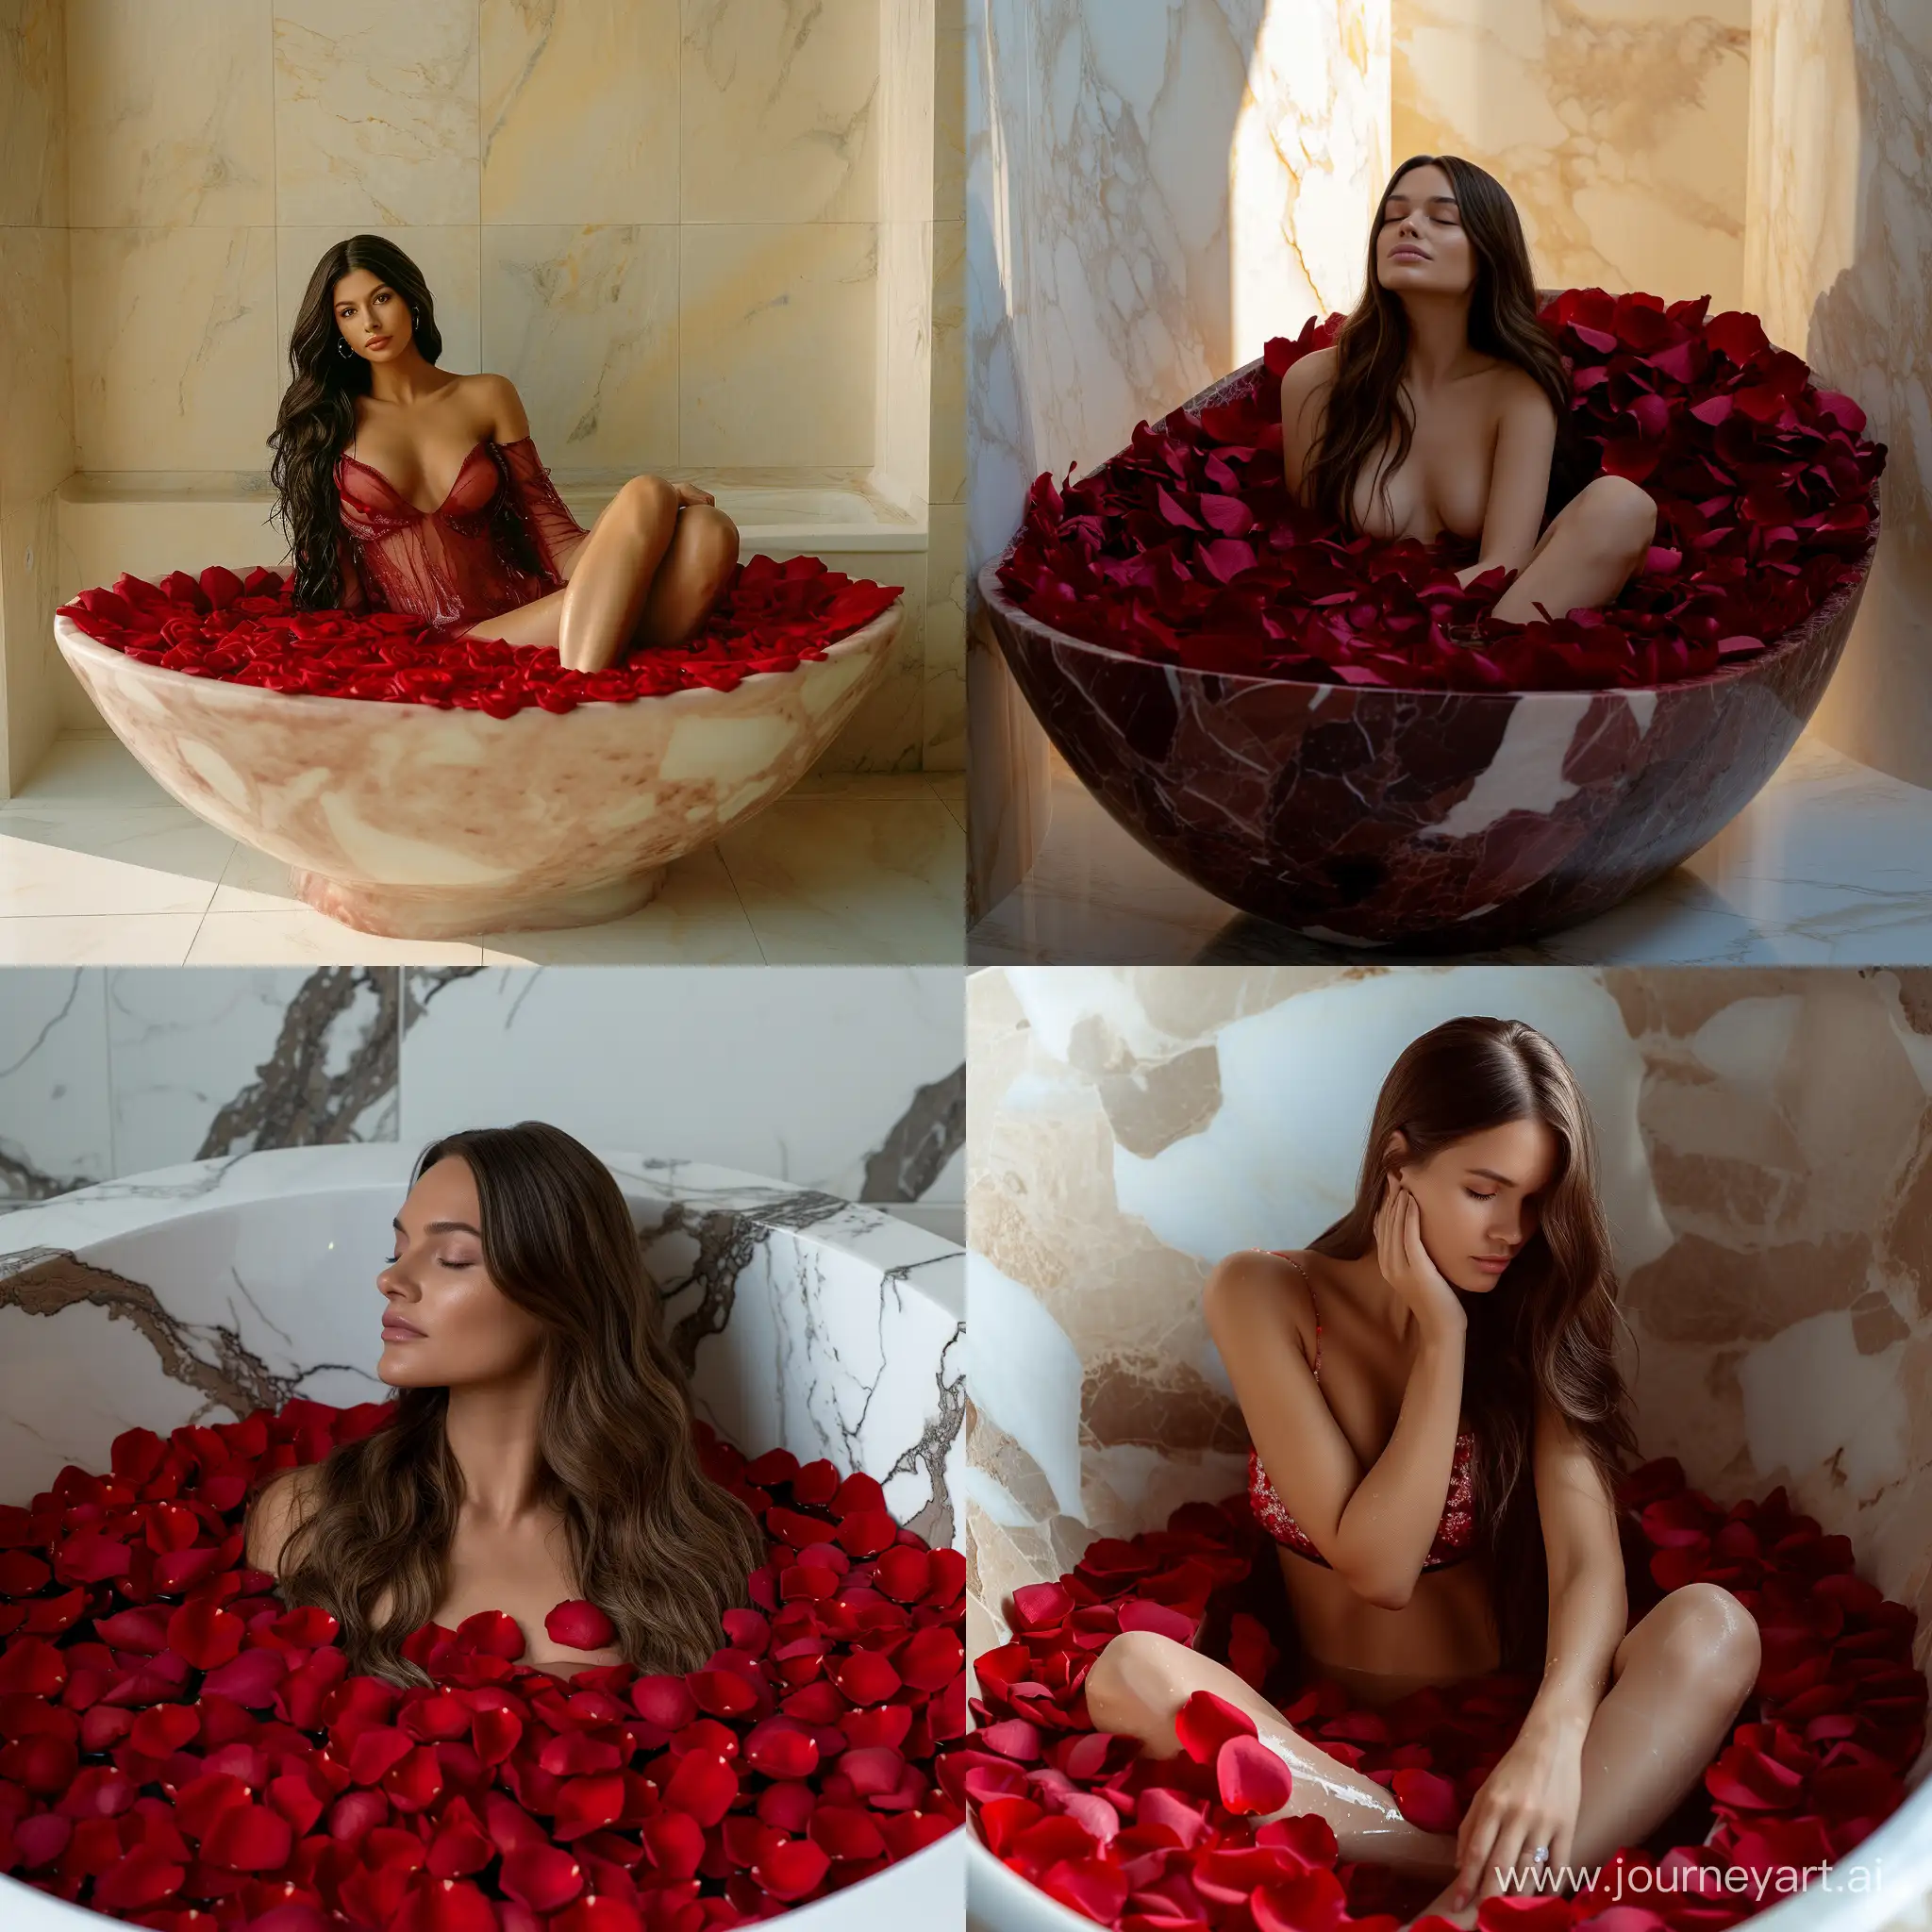 brunette model that doesn't exist in real life, bathing in a red rose petal bath tub, 4K, UHD, pinterest aesthetic, large marbel bath tub